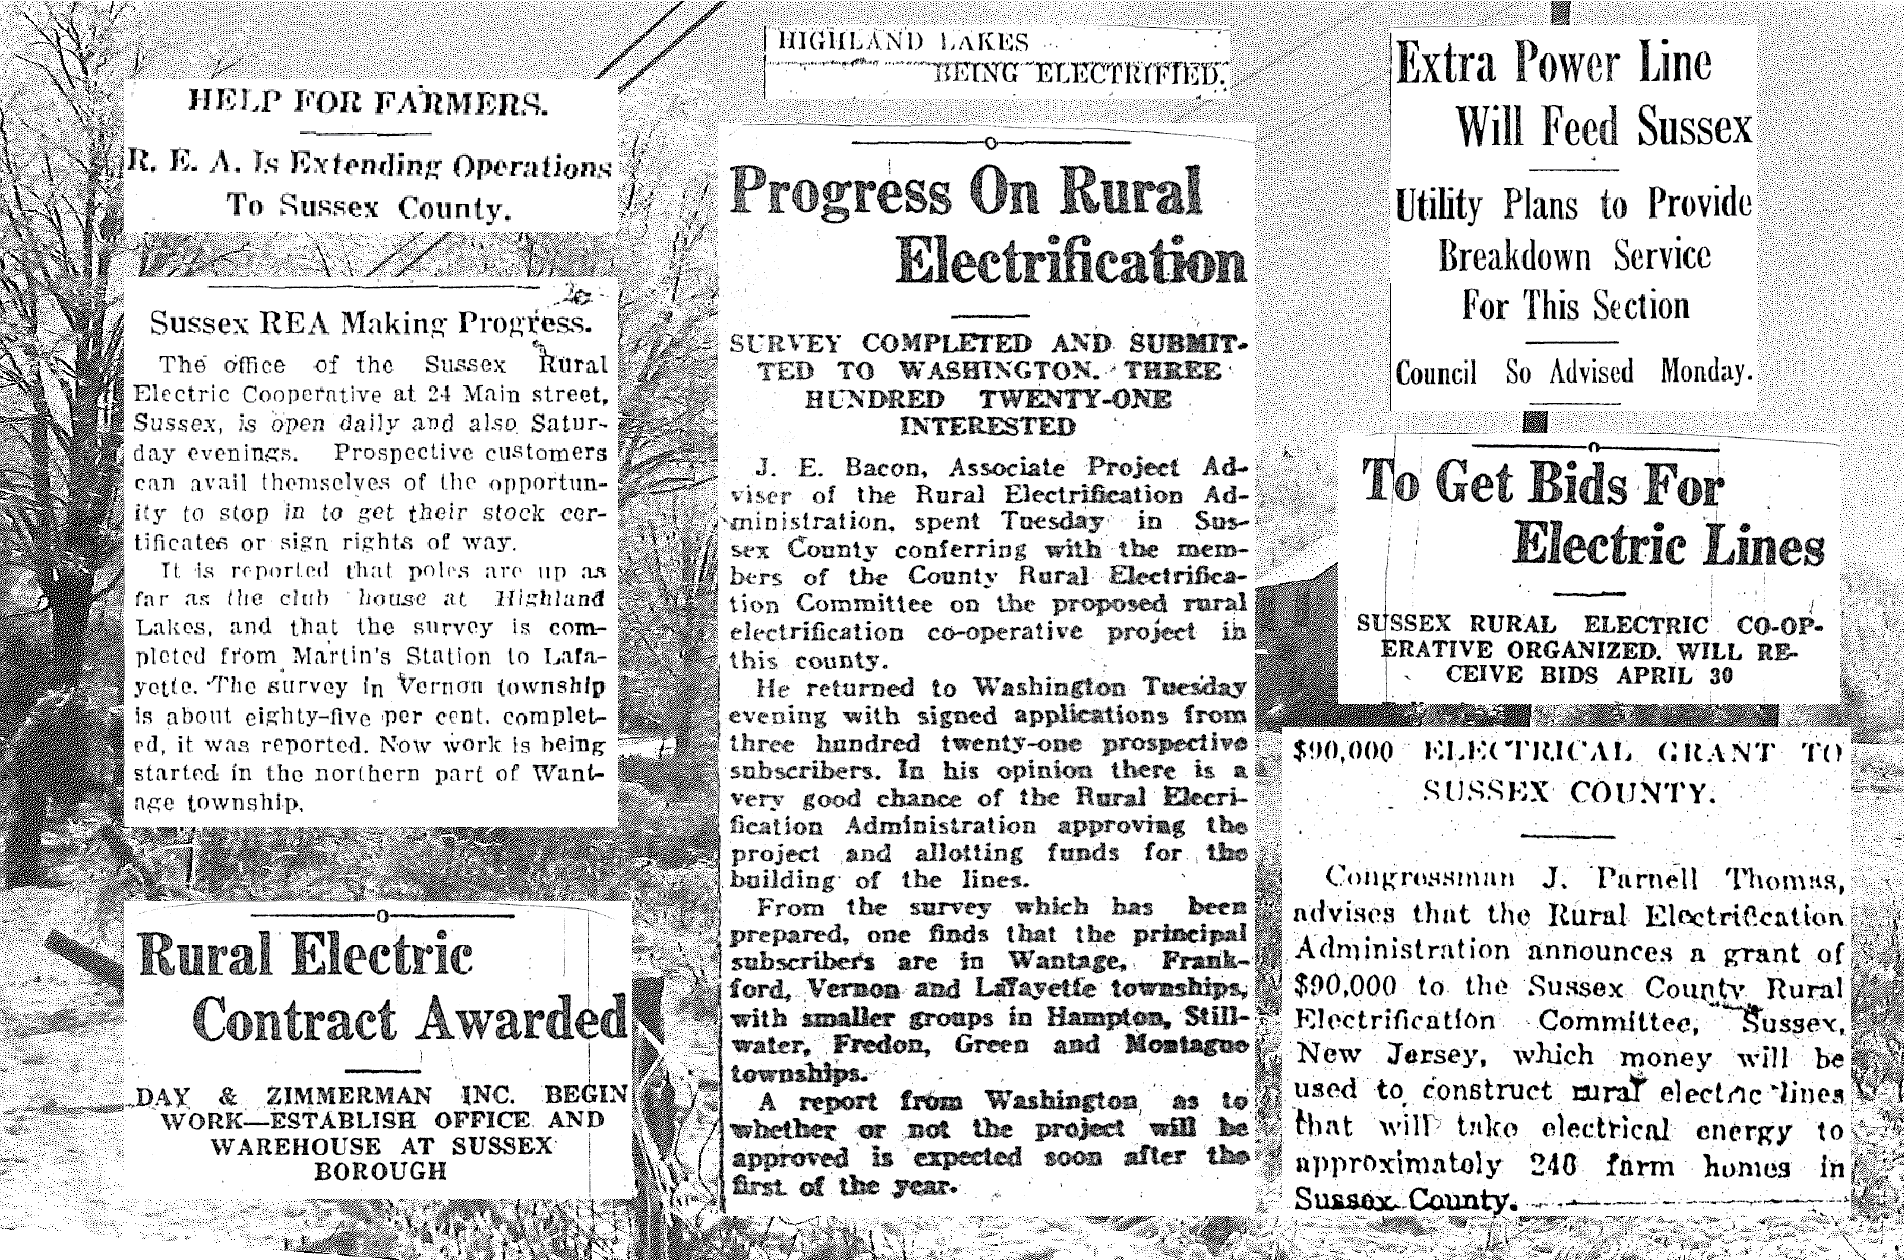 A collage of various local headlines from the late 1930s as SREC was beginning its operations. Some headlines read: "Help for Farmers" "Sussex REA Making Progress" "Rural Electric Contract Awarded" "Highland Lakes Being Electrified" "Progress On Rural Electrification" "Extra Line Will Feed Sussex" "To Get Bids For Electric Lines" and "$90,000 Electrical Grant To Sussex County"